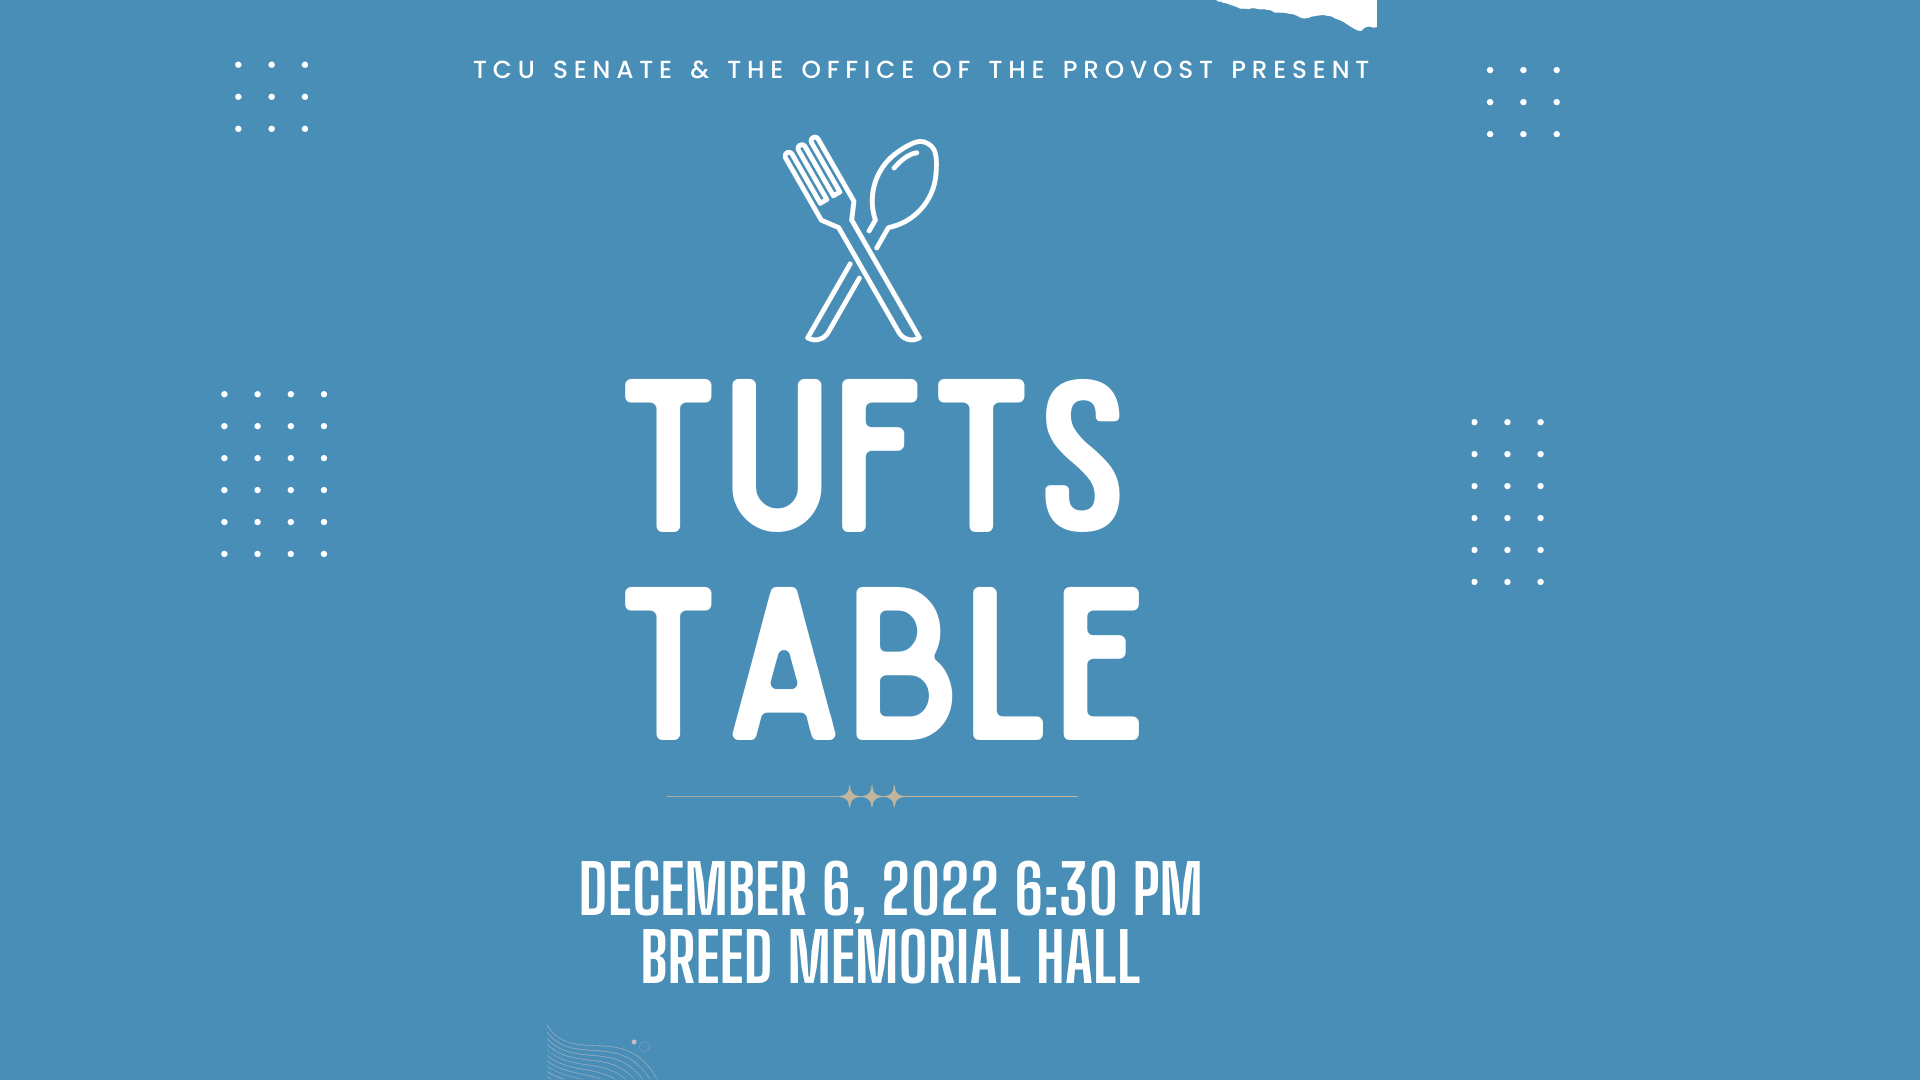 TCU Senate and the Office of the Provost present: Tufts Table on December 6, 2022 at 6:30 p.m. in Breed Memorial Hall